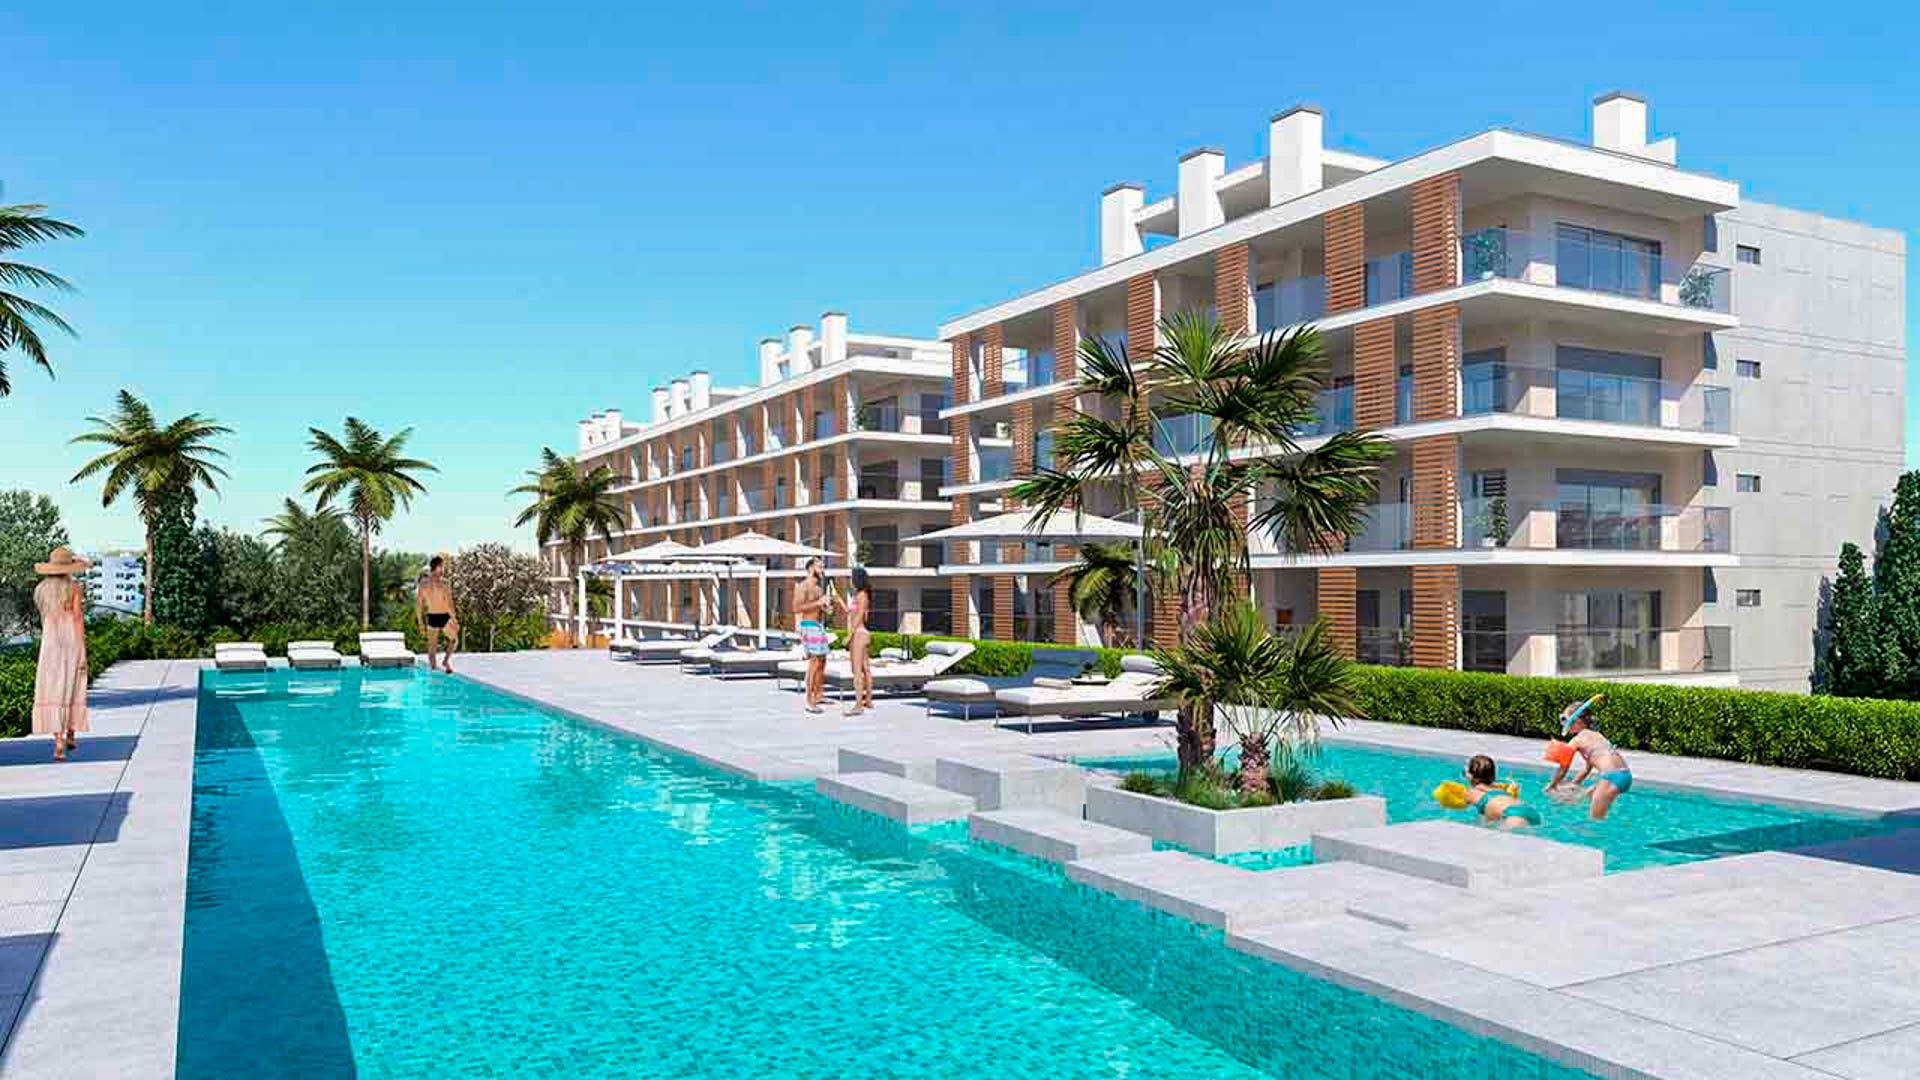 Investment Opportunity - Off Plan 2 Bedroom Penthouse Apartments, Albufeira | VM1968 Eco-friendly features to minimize environmental impact, these new apartments are perfect for an investment opportunity or holiday home